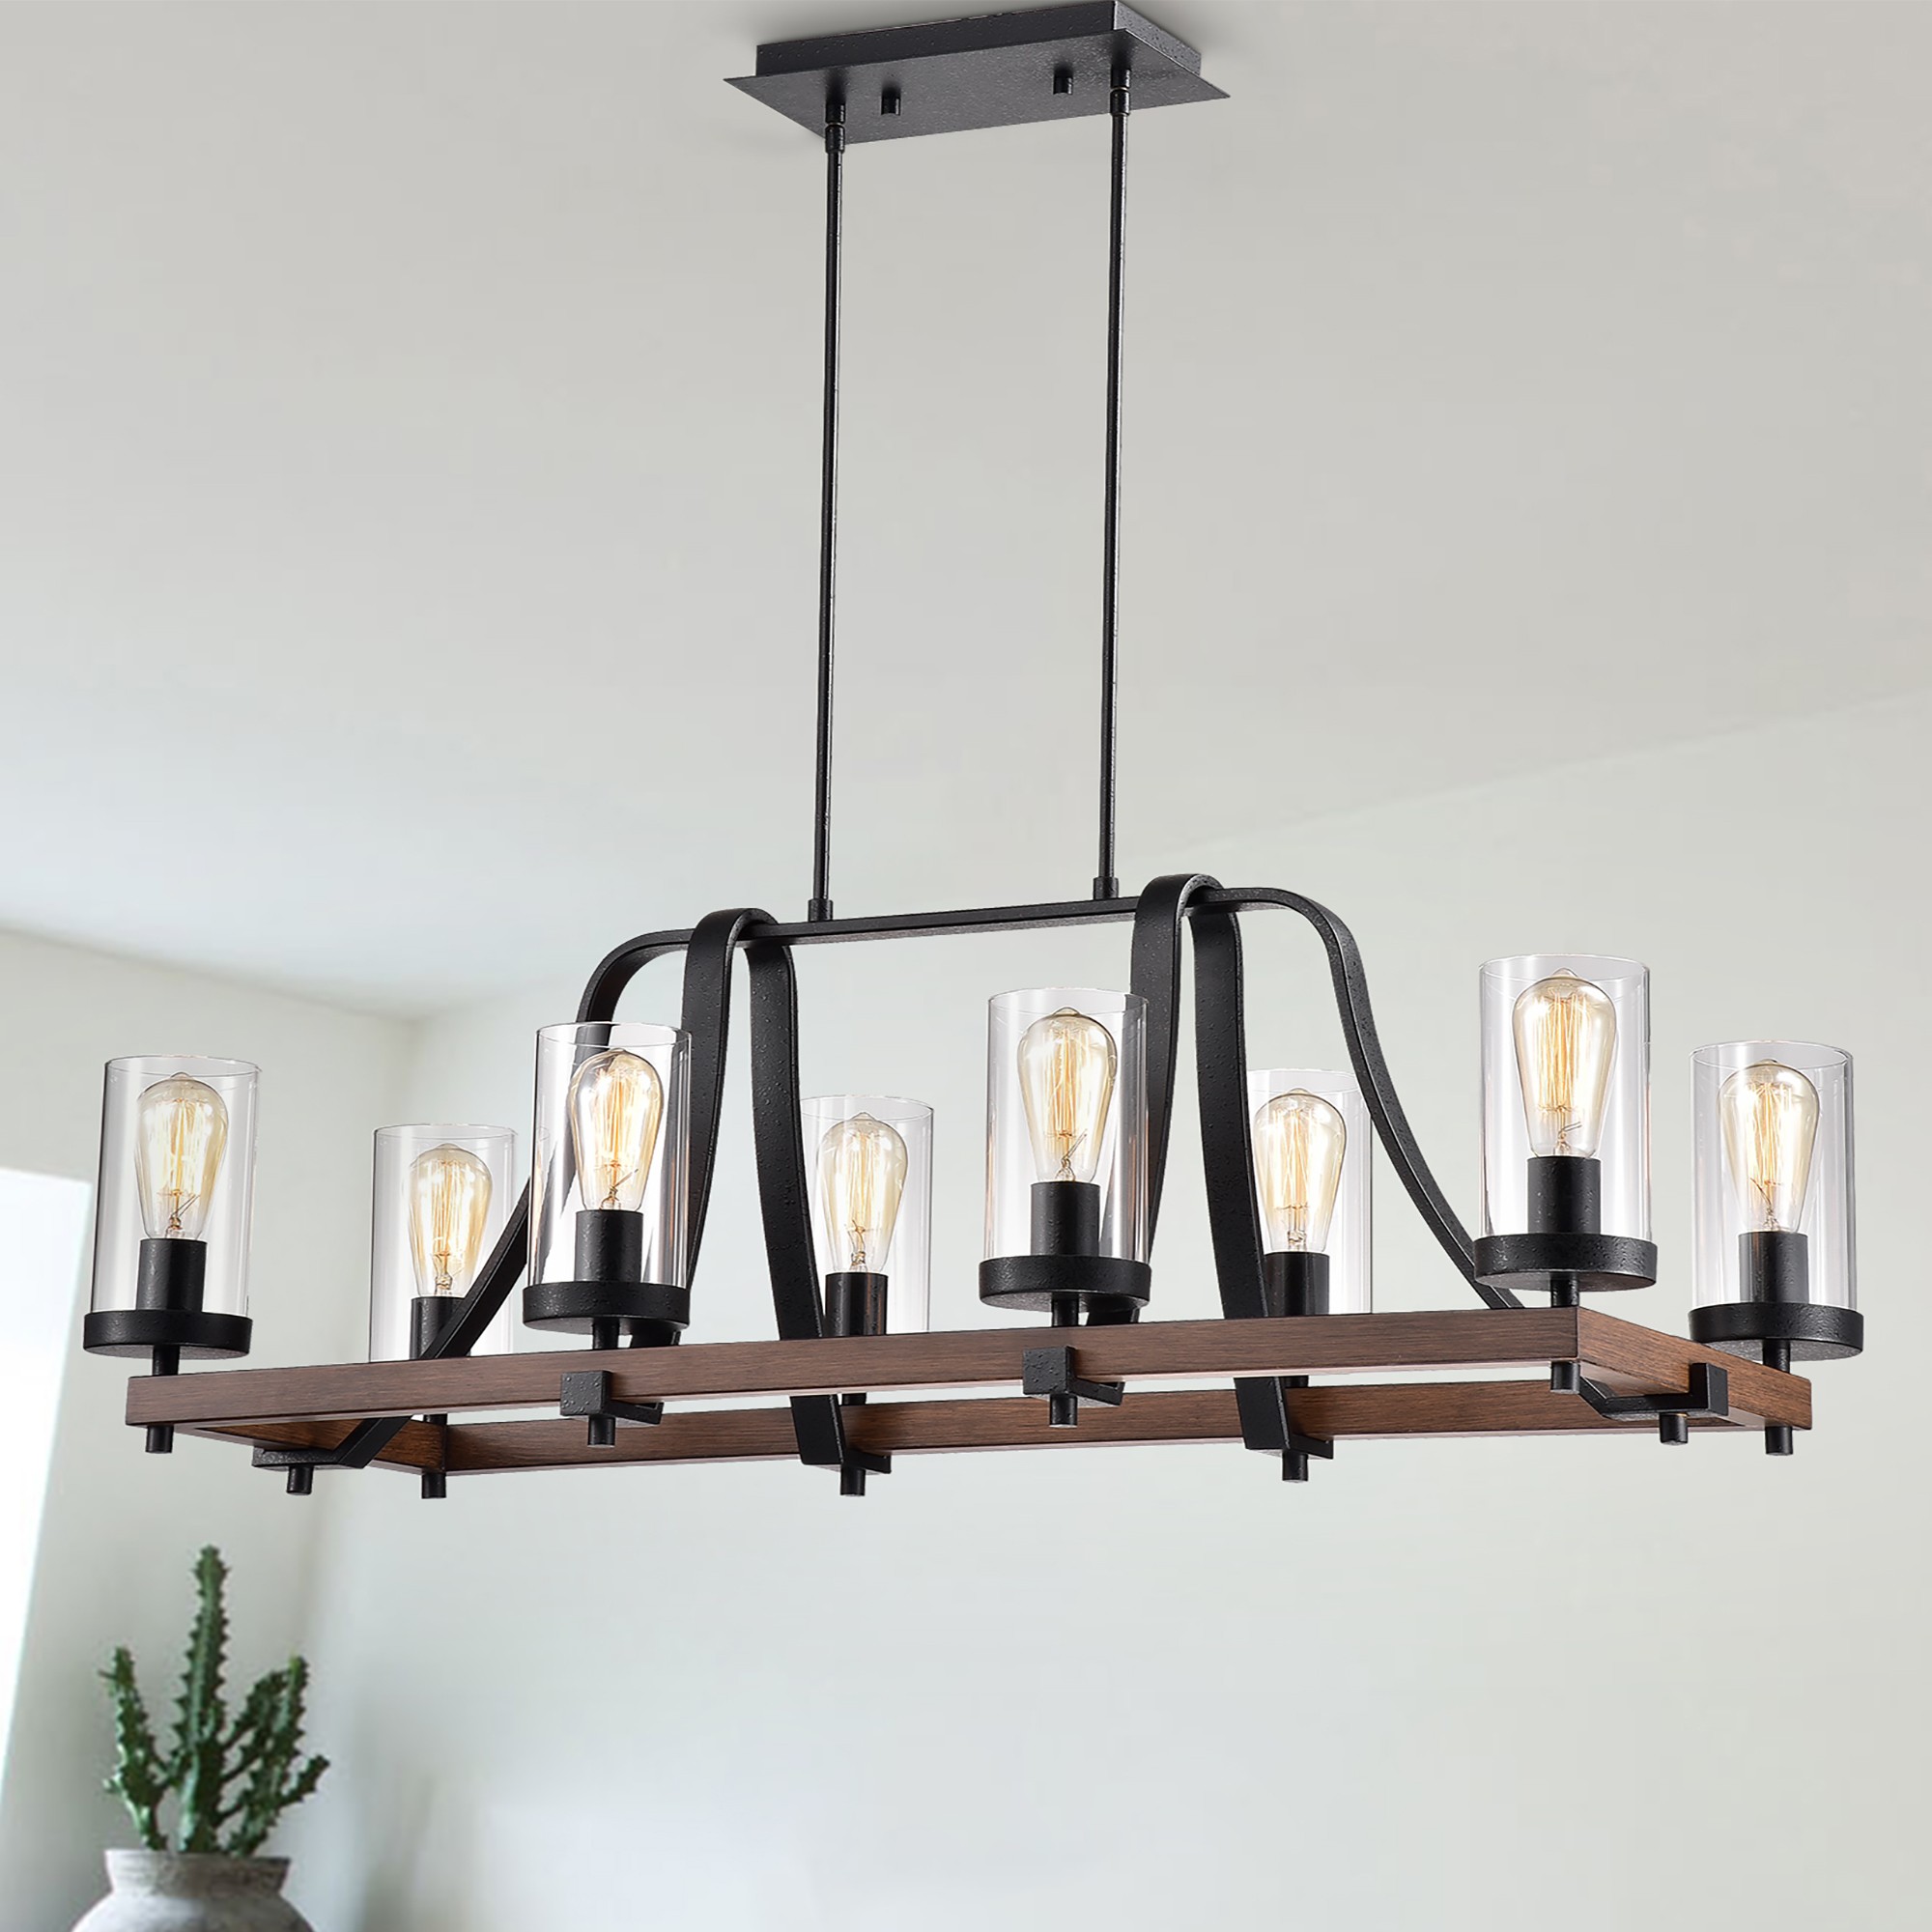 Guntel Forged Metal Multi-Light Chandelier with Glass Pillar Shades (6 OR 8 lamps)